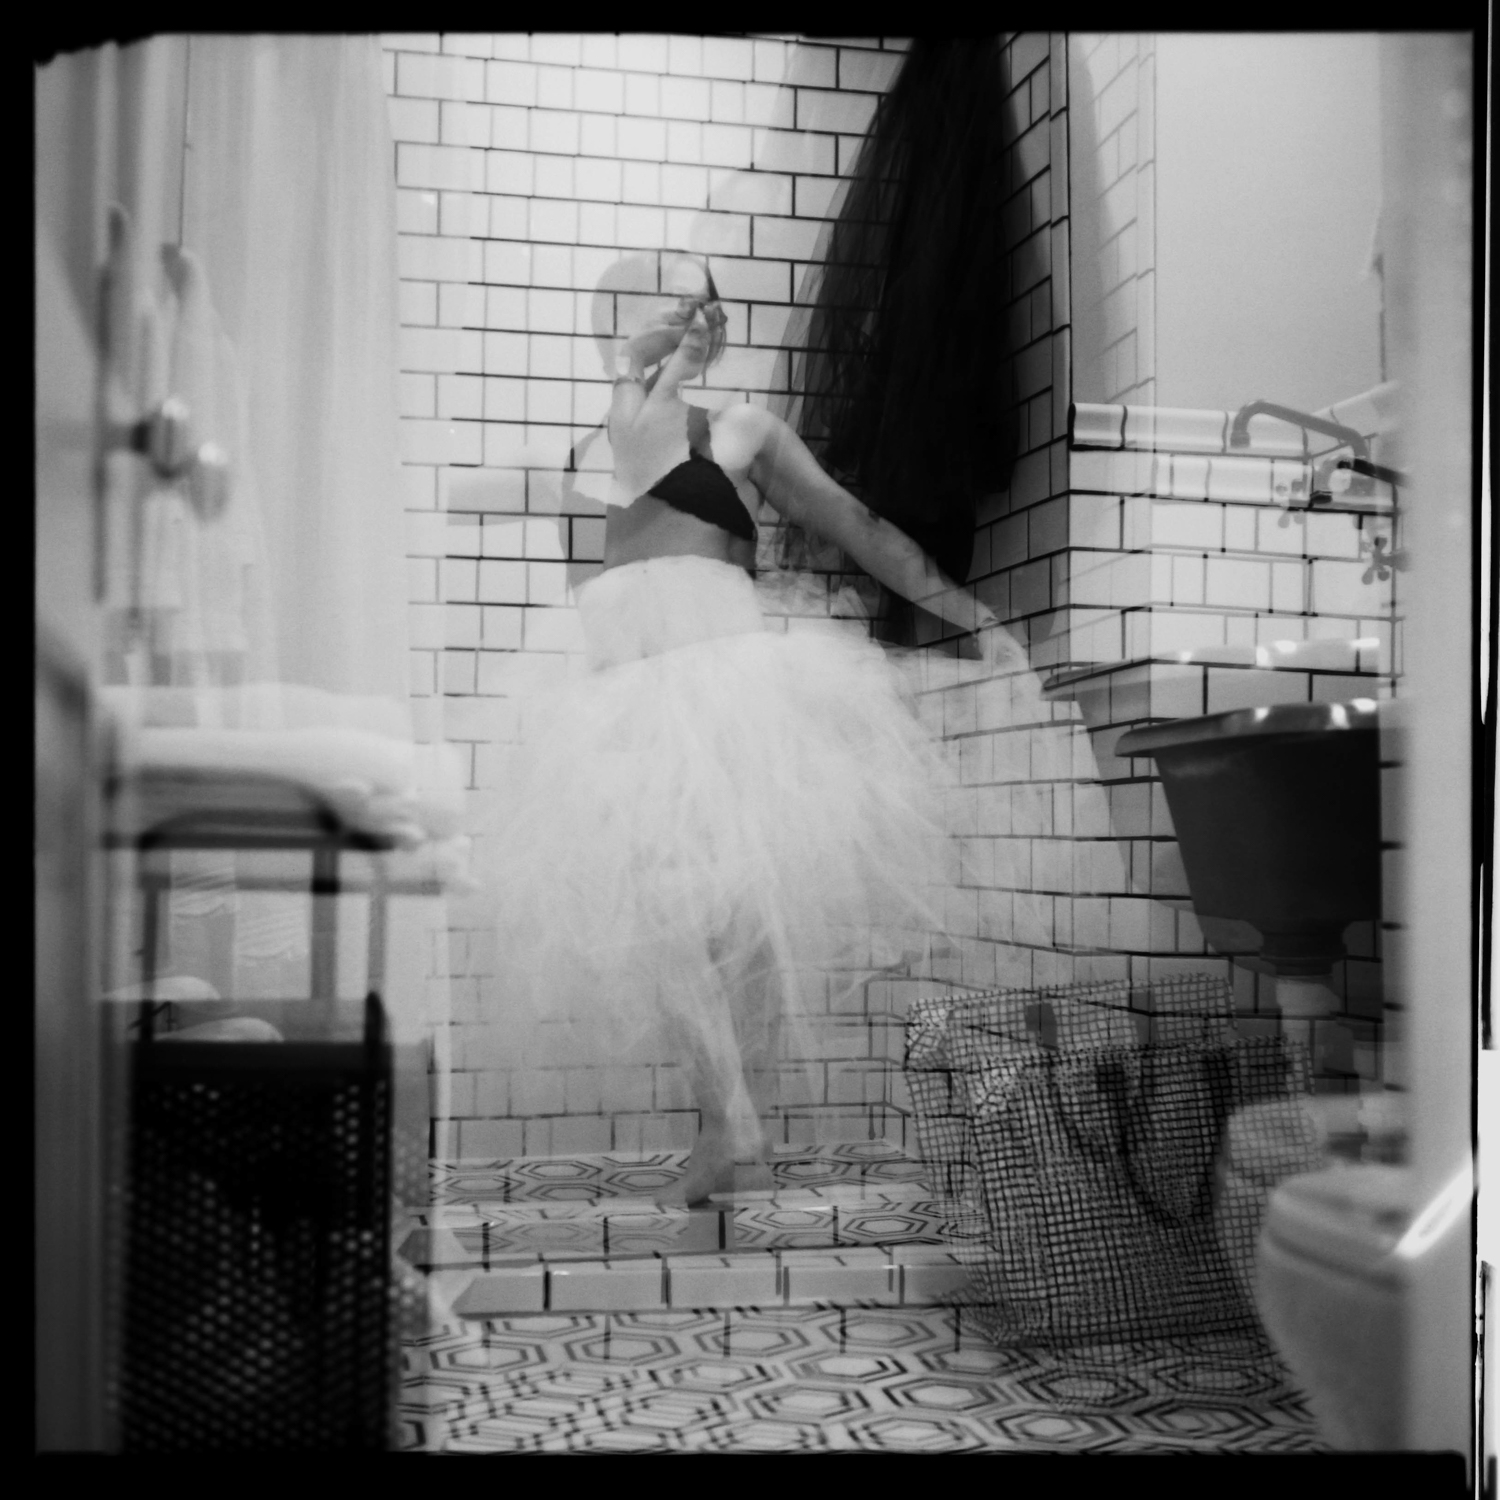 Double-exposure black-and-white portrait of a woman swirling in a white tutu in a bathroom